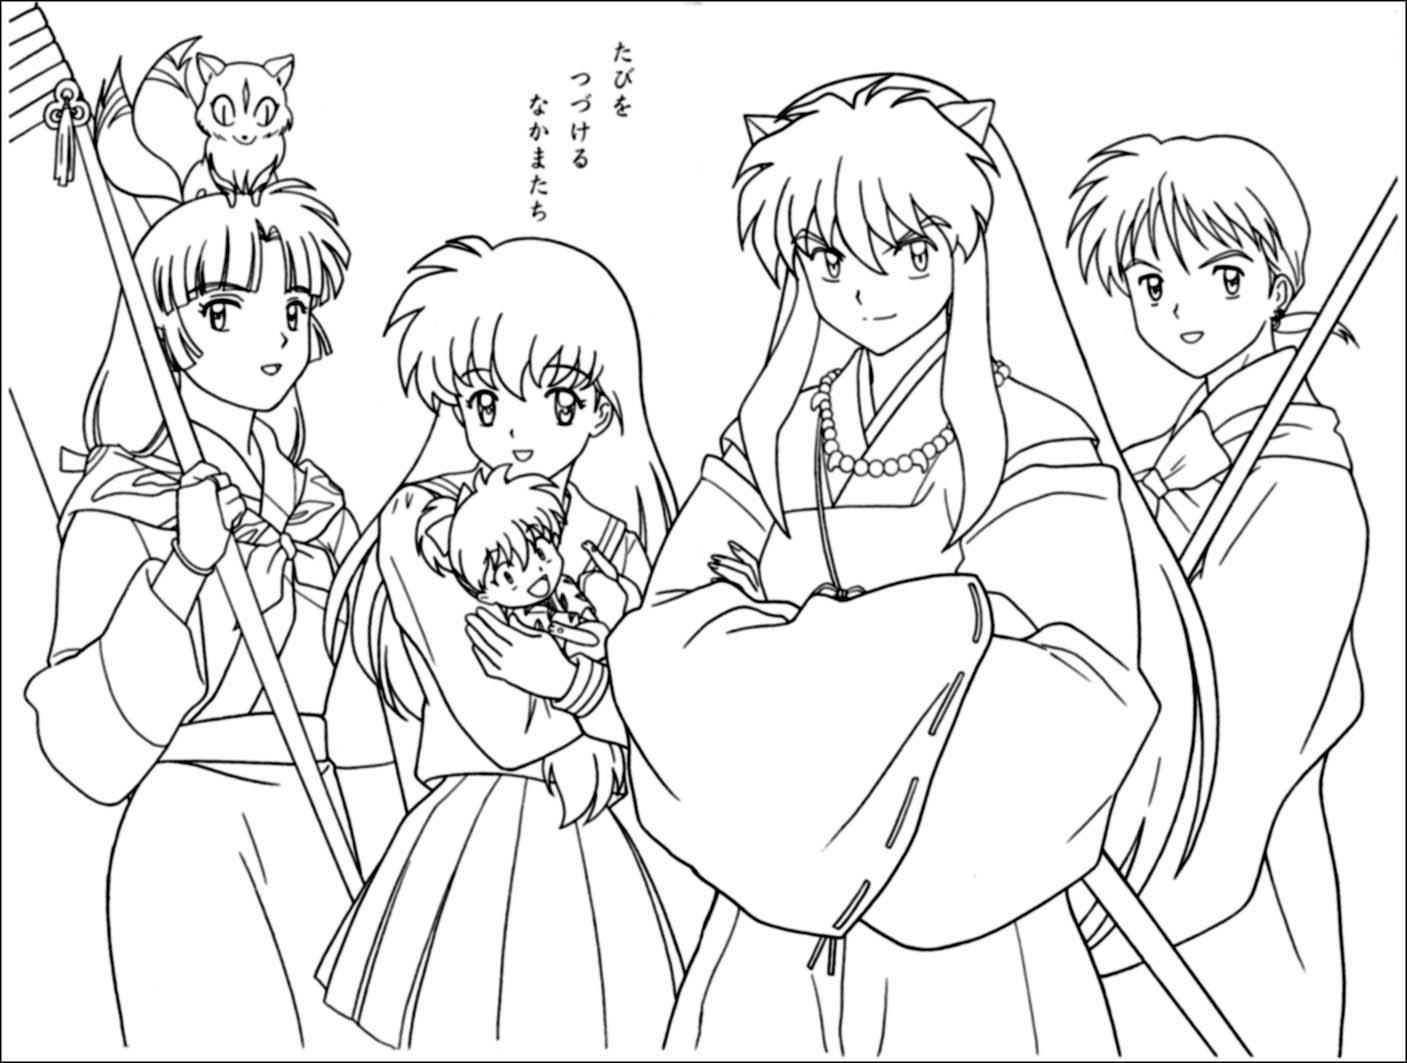 Inuyasha Coloring Pages (13 Pictures) - Colorine.net | 26152